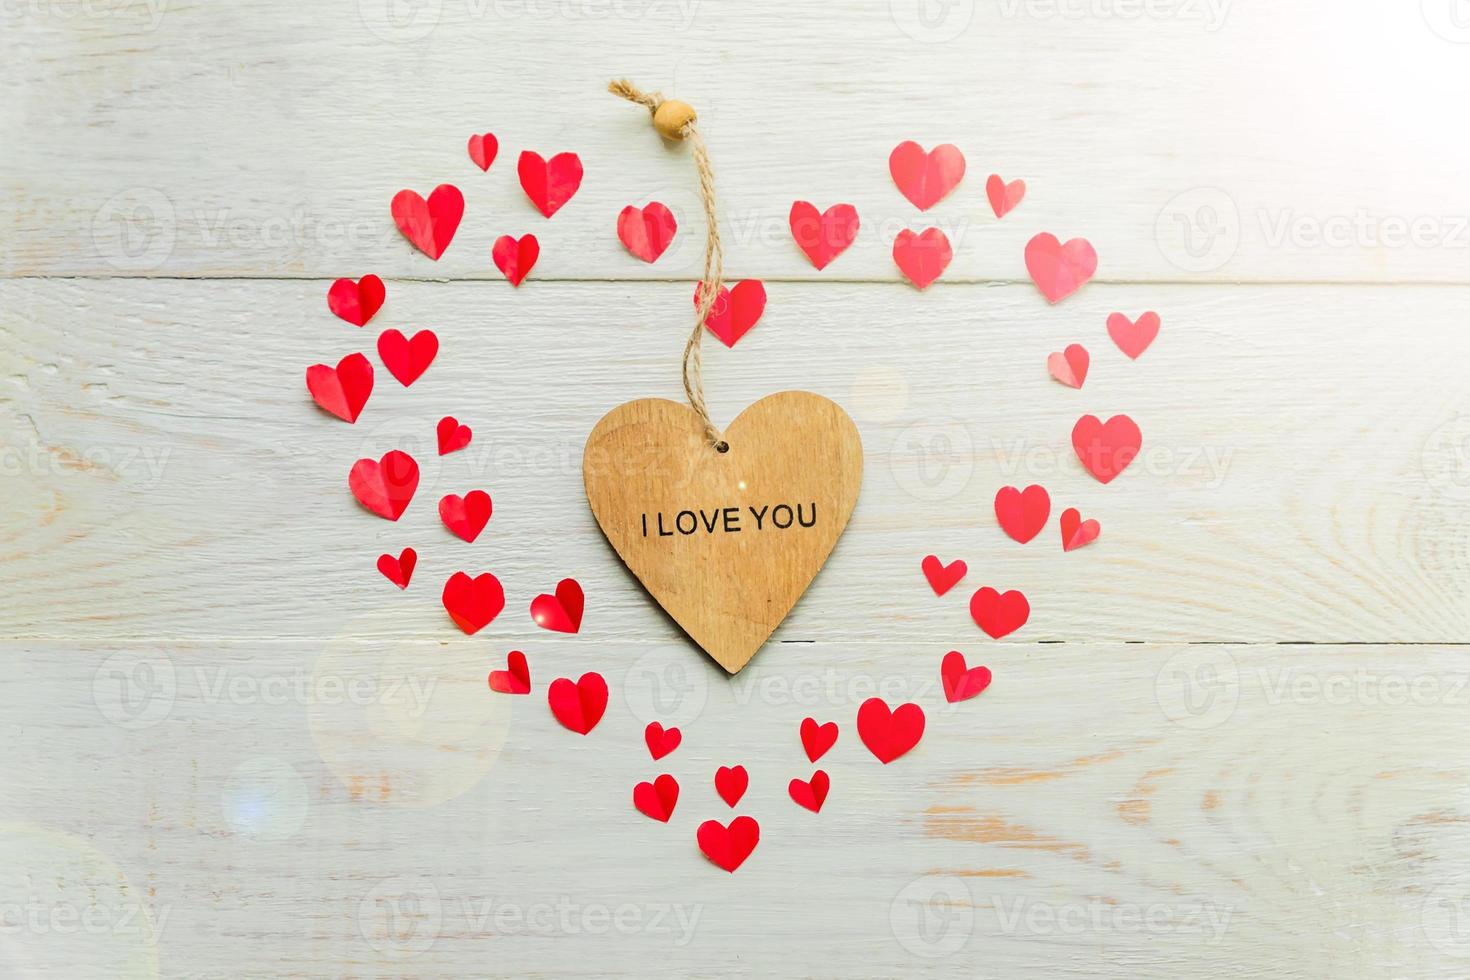 Big red heart made of cut out paper small hearts and wooden heart with I love you inscription on wooden backround. Handmade decoration for Valentine's day. photo